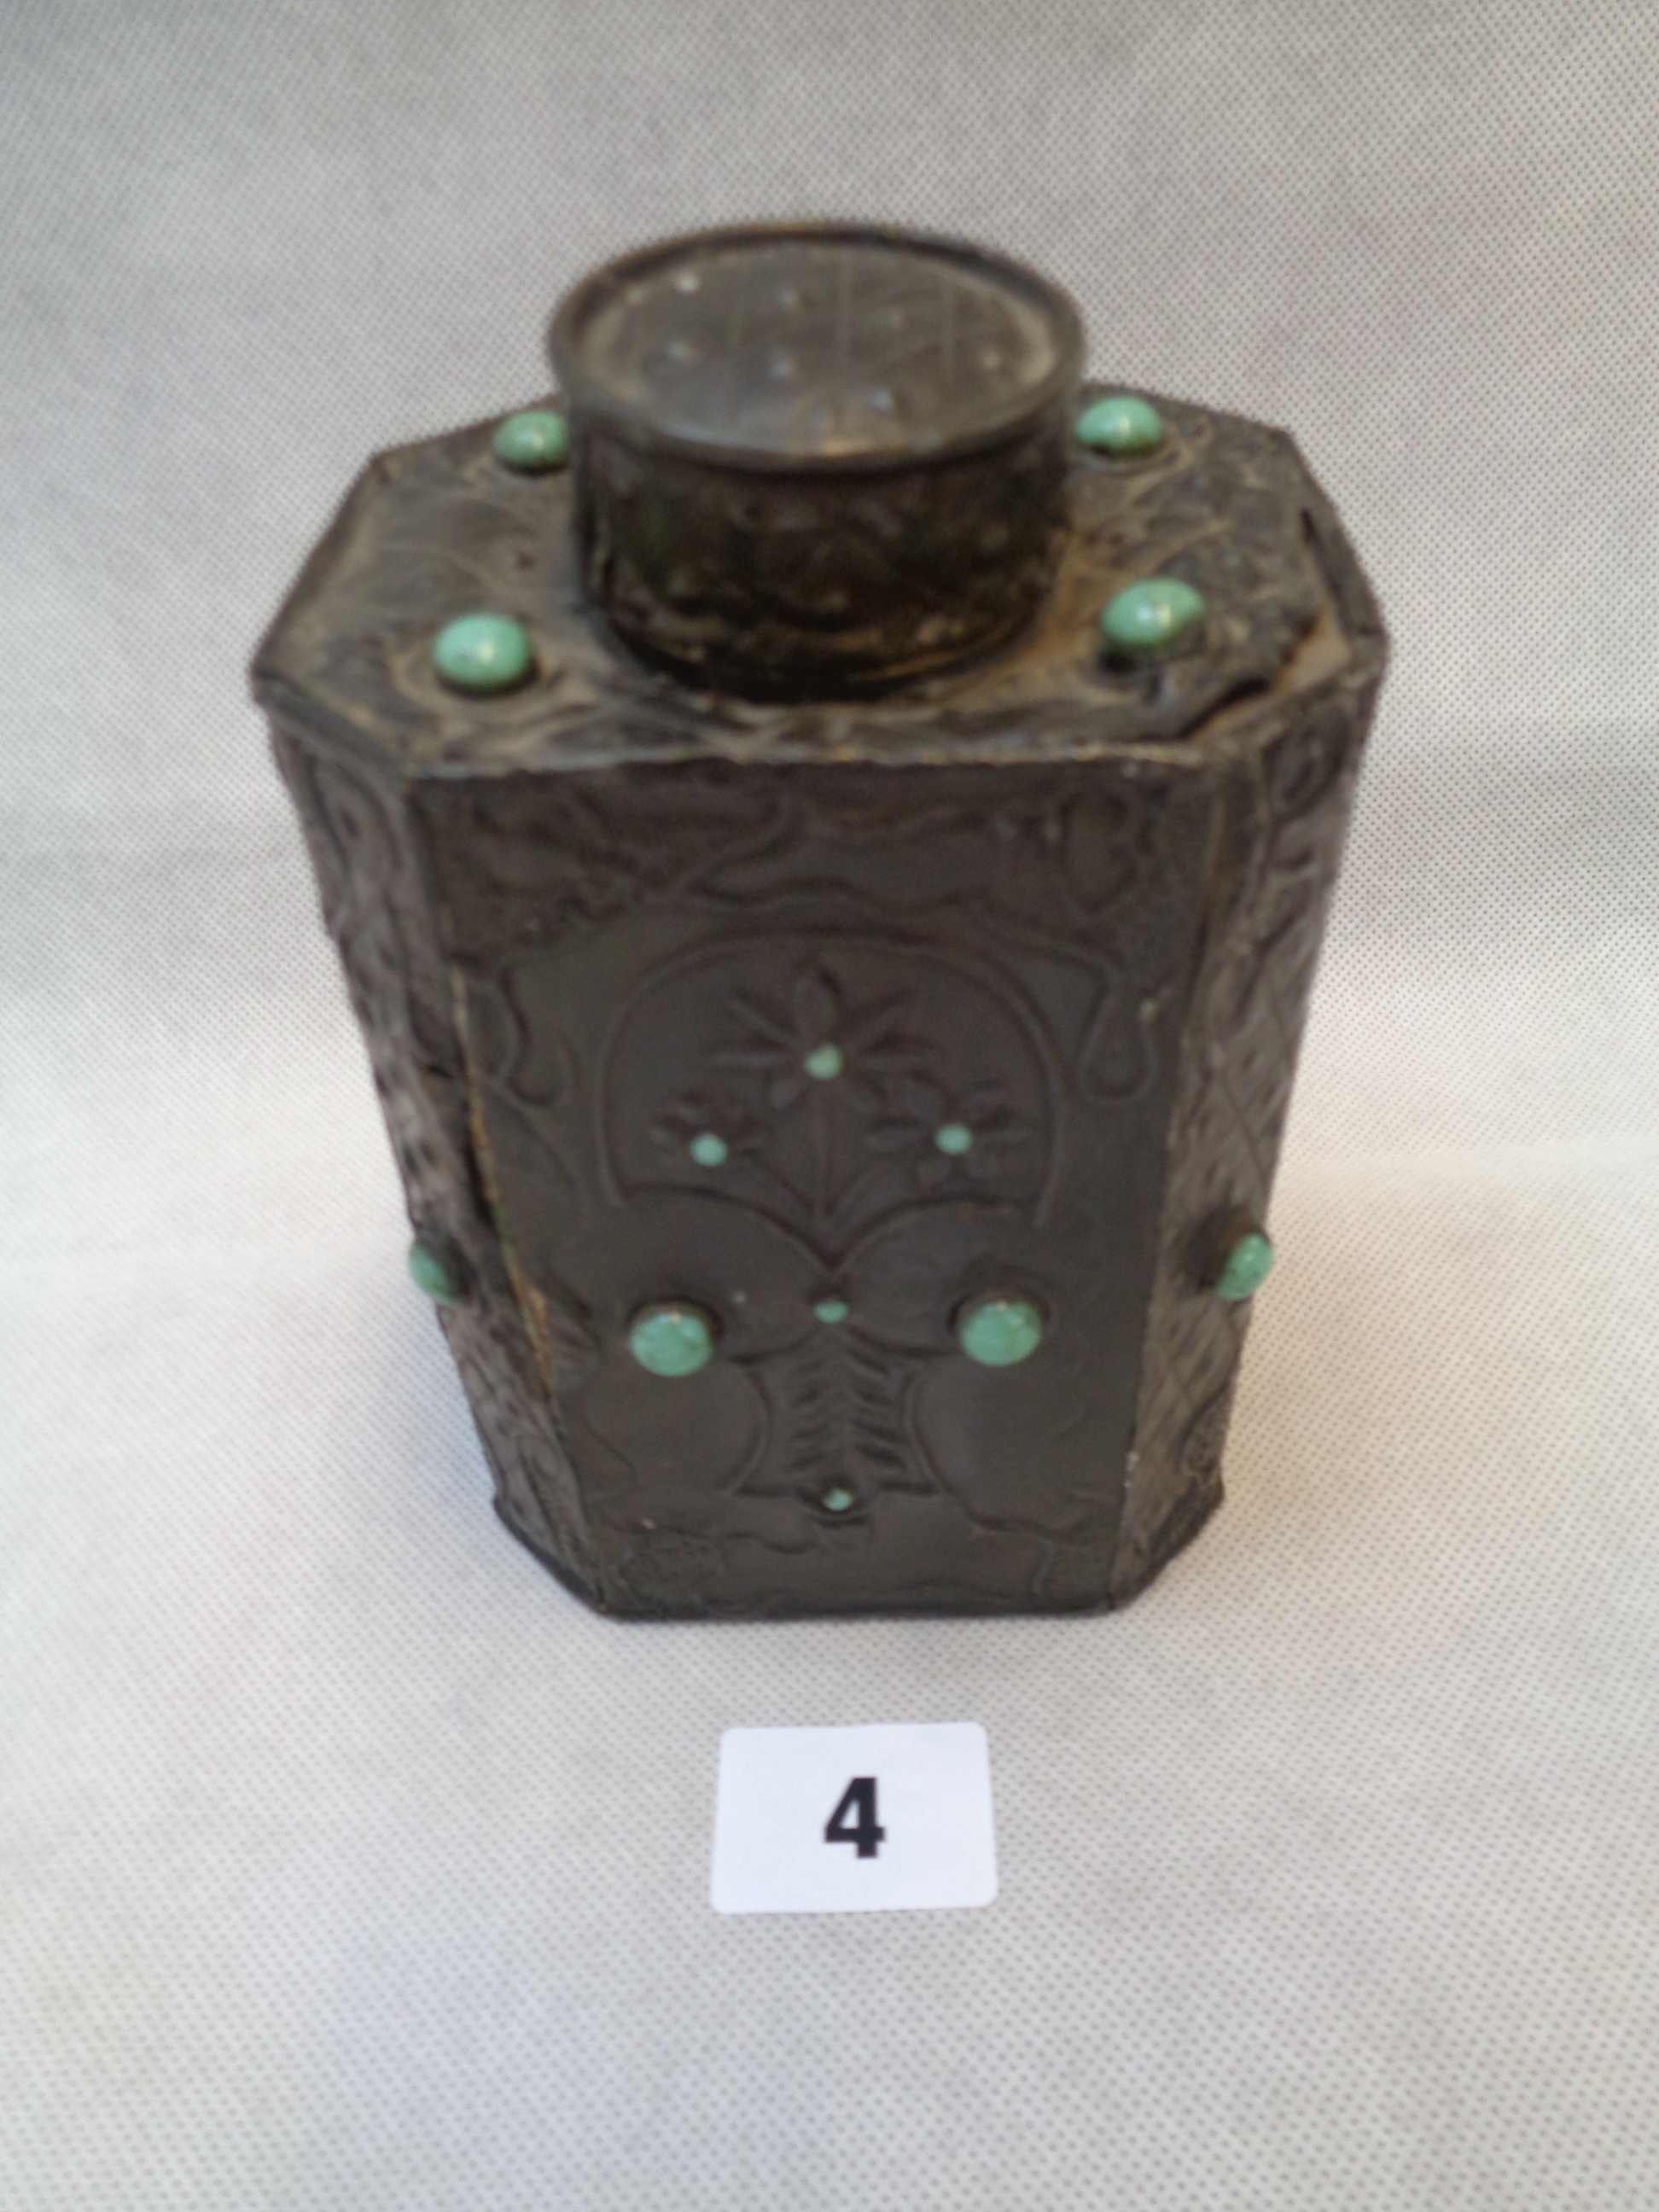 Arts & Crafts Tin Overlay Tea Caddy of Octagonal form with raised floral decoration set with